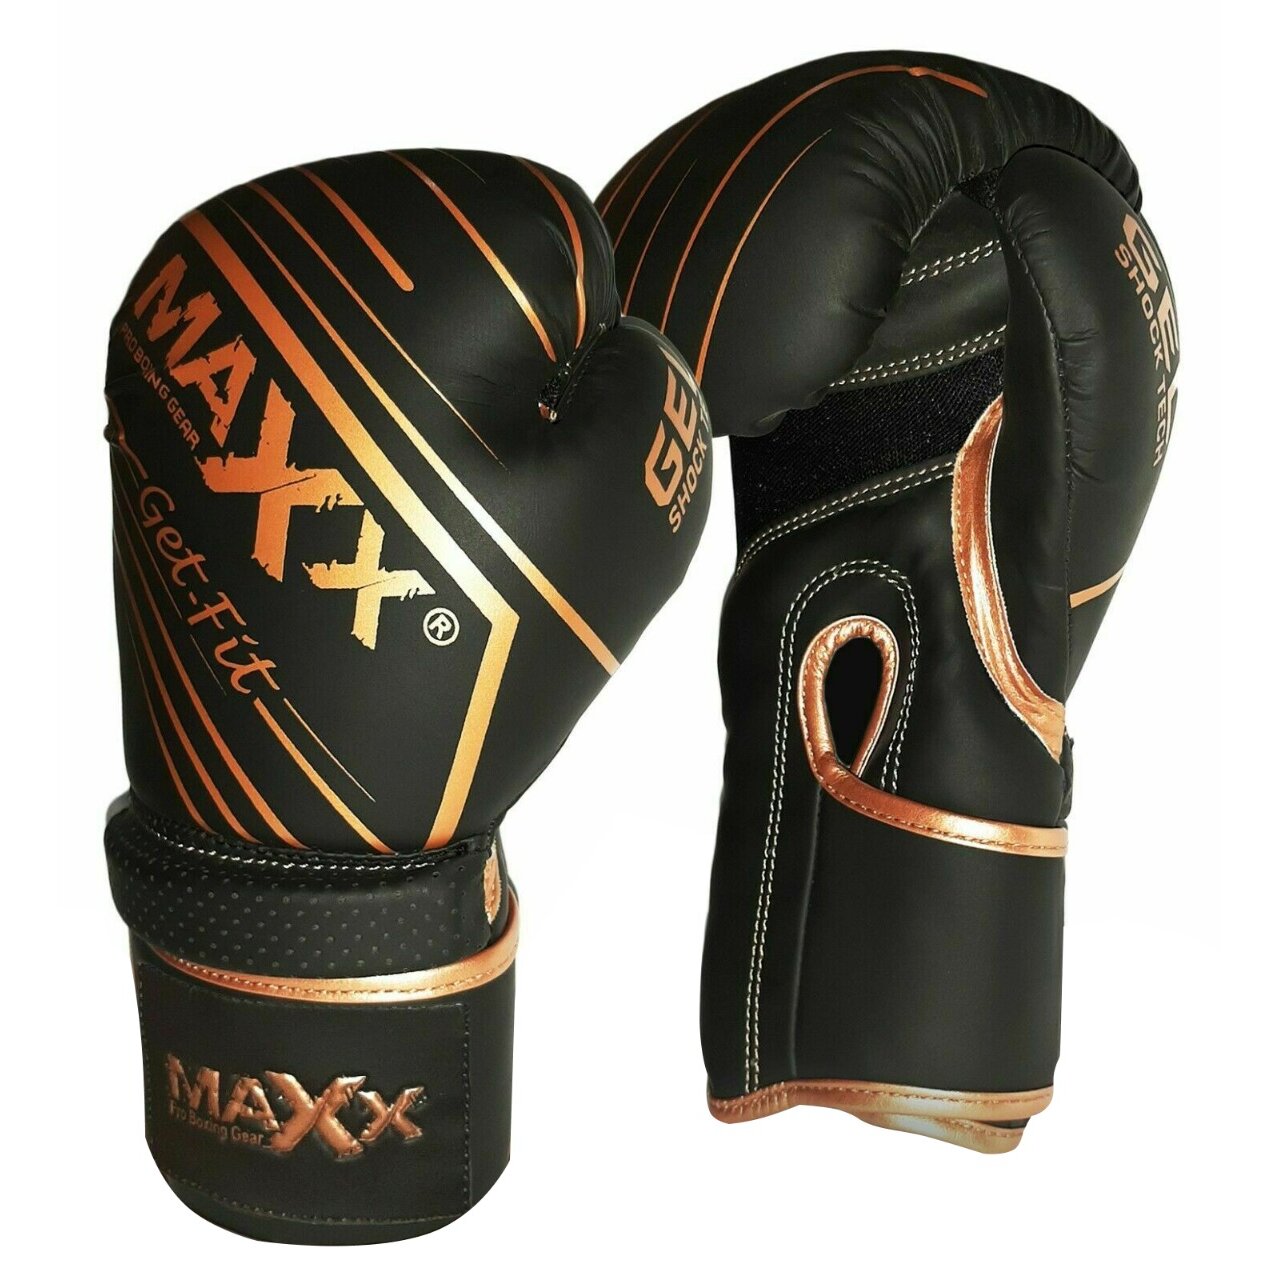 Maxx? Maya Leather GEL Boxing Gloves MMA Training Fight Sparring Glove Pad